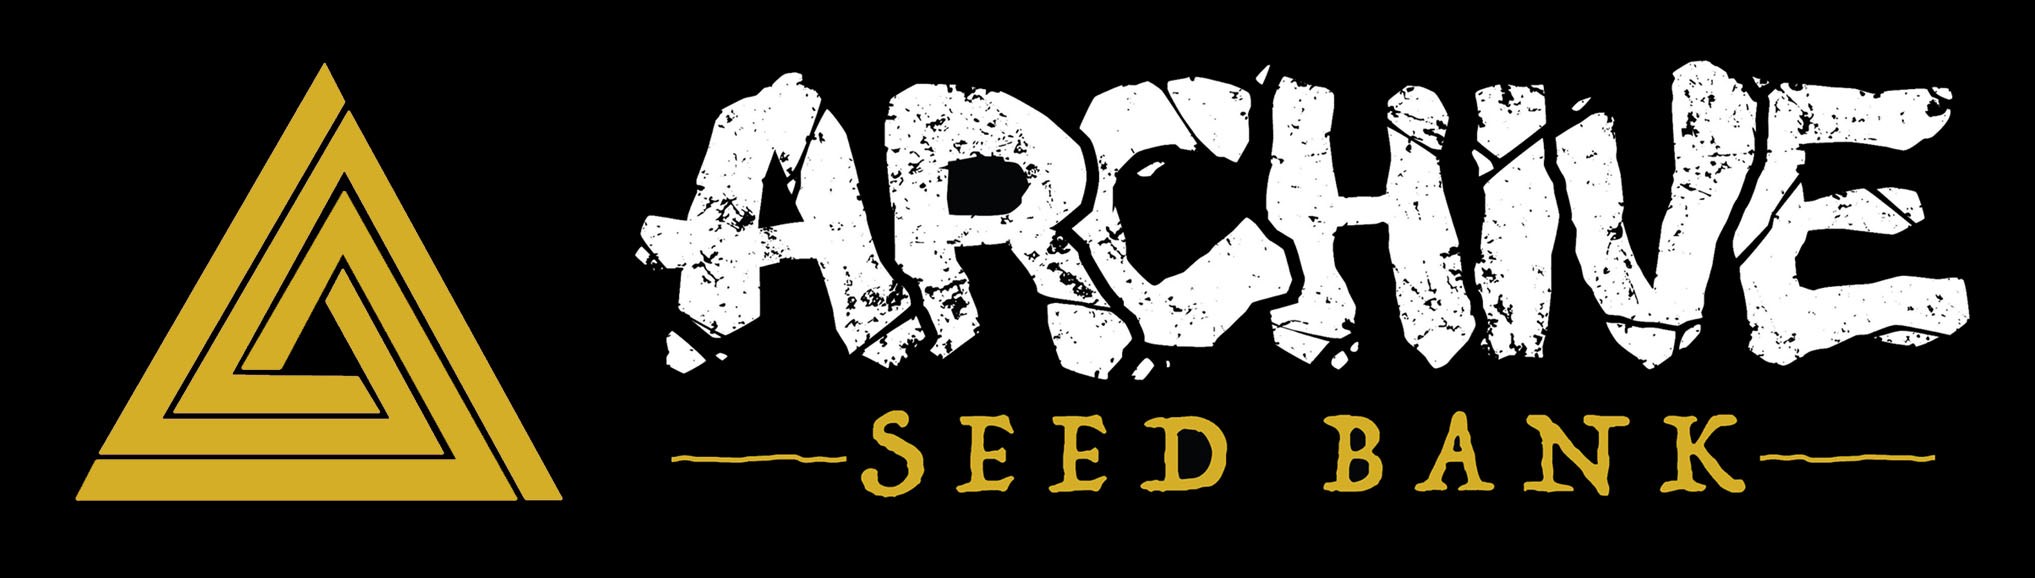 archive-seed-bank-logo